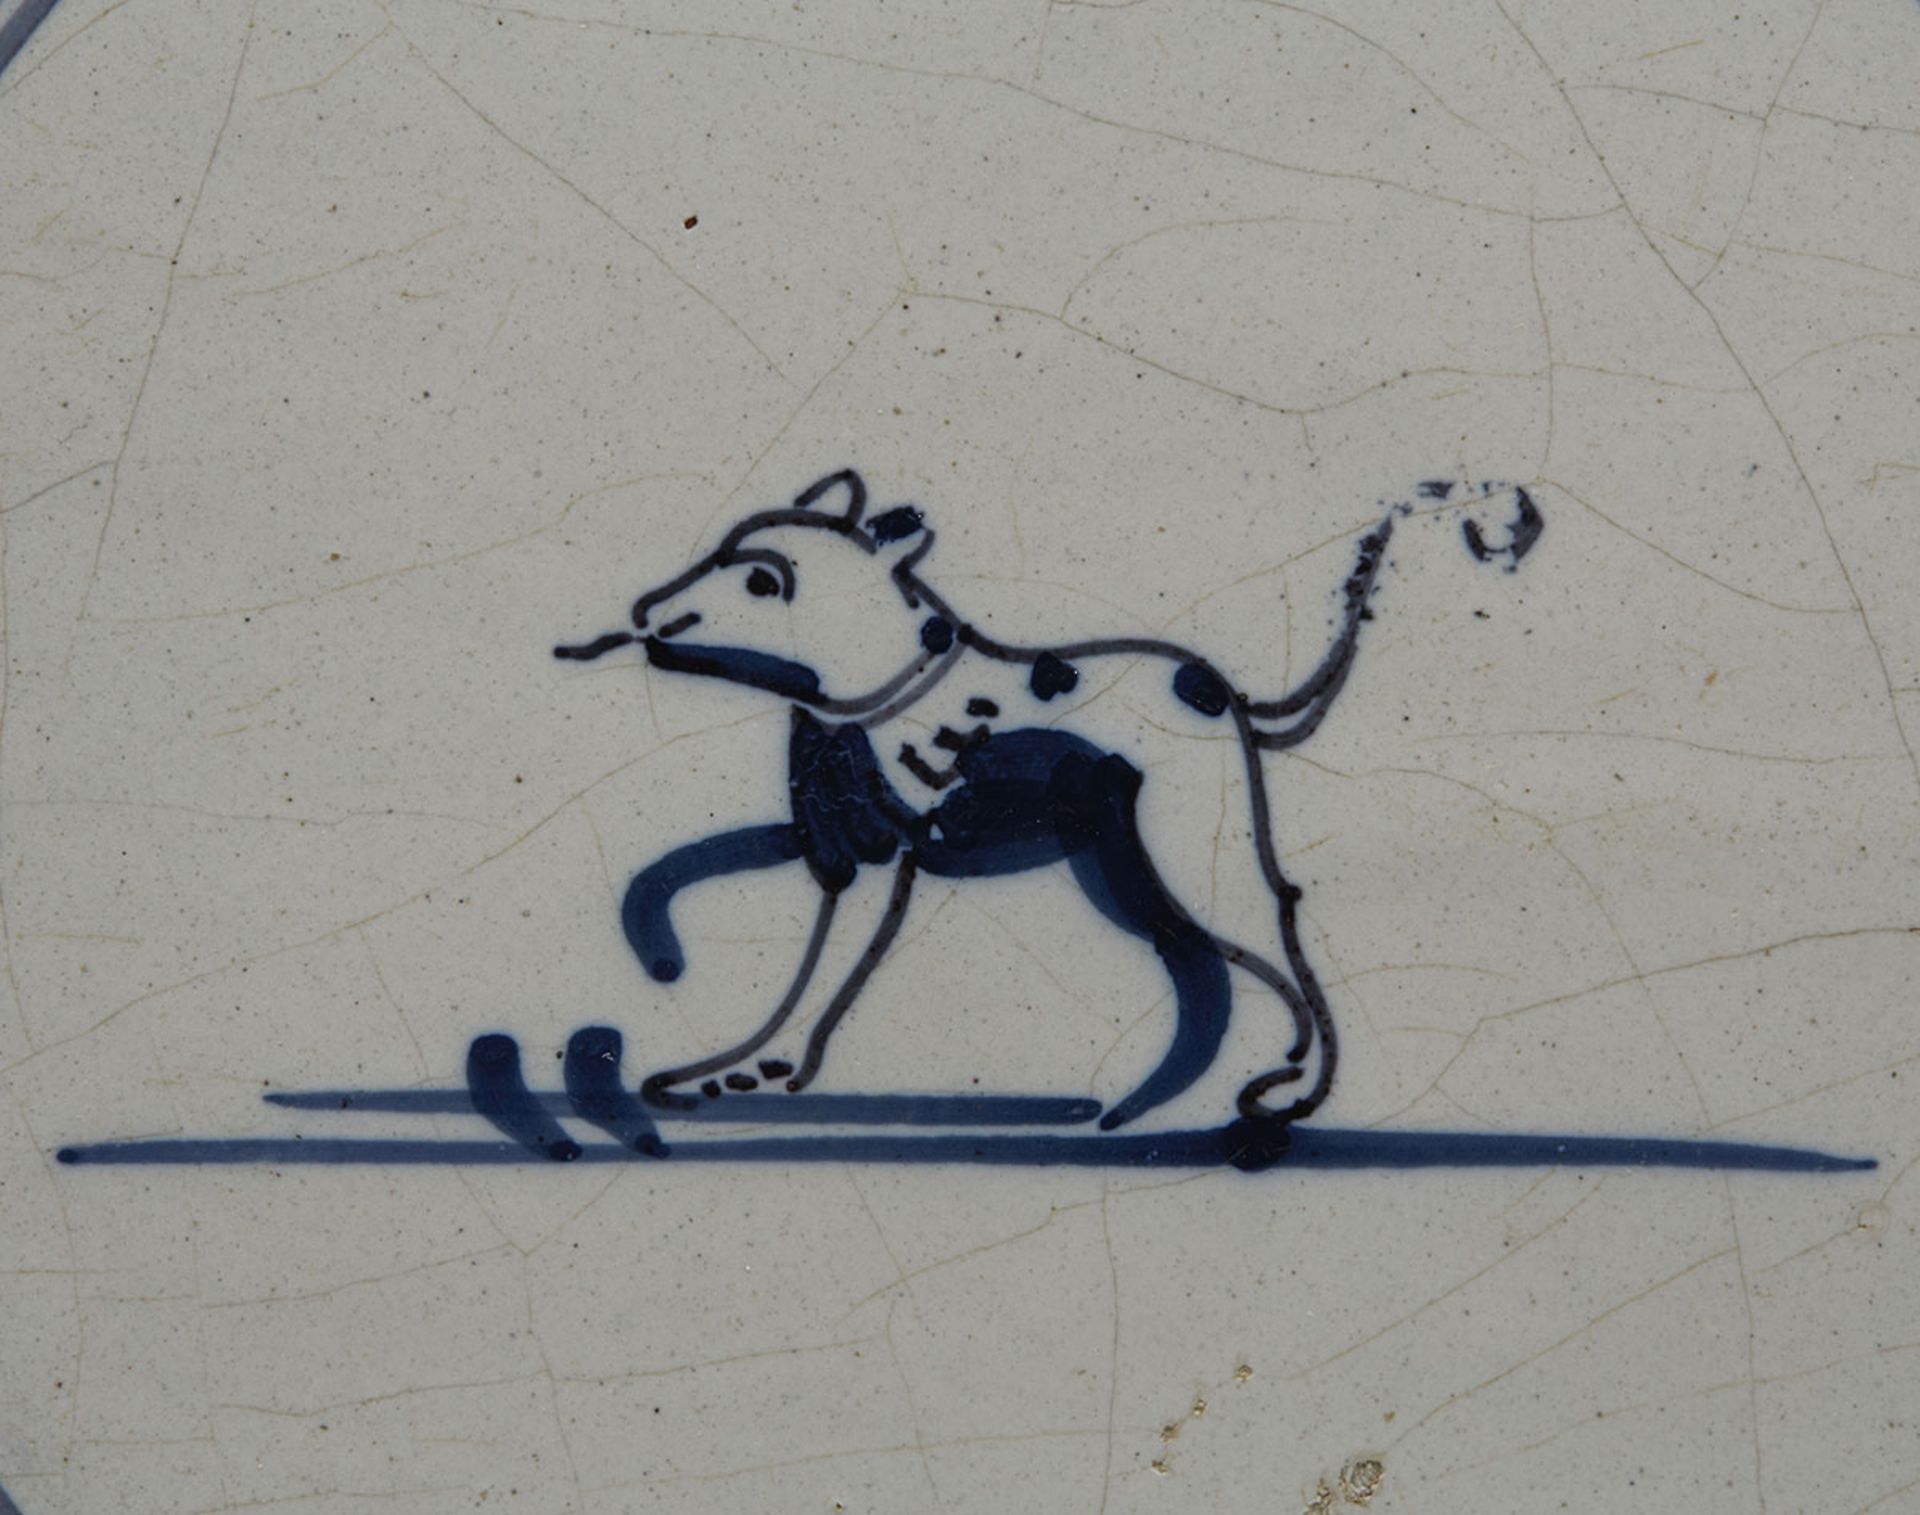 ANTIQUE DELFT FAIENCE BLUE & WHITE TILE WITH DOG 18/19TH C - Image 2 of 5